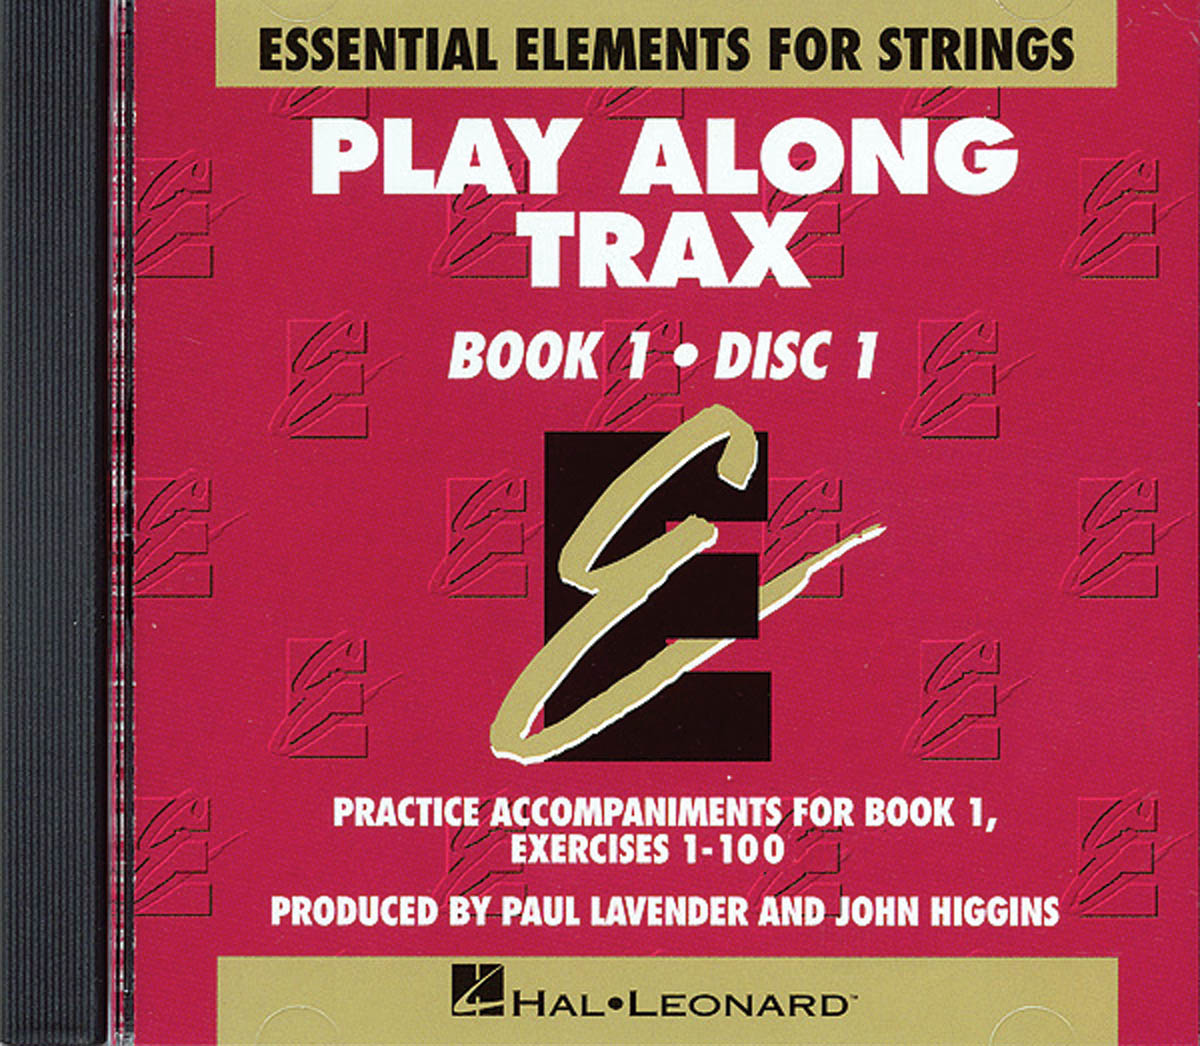 Essential Elements for Strings - Book 1: String Orchestra: CD